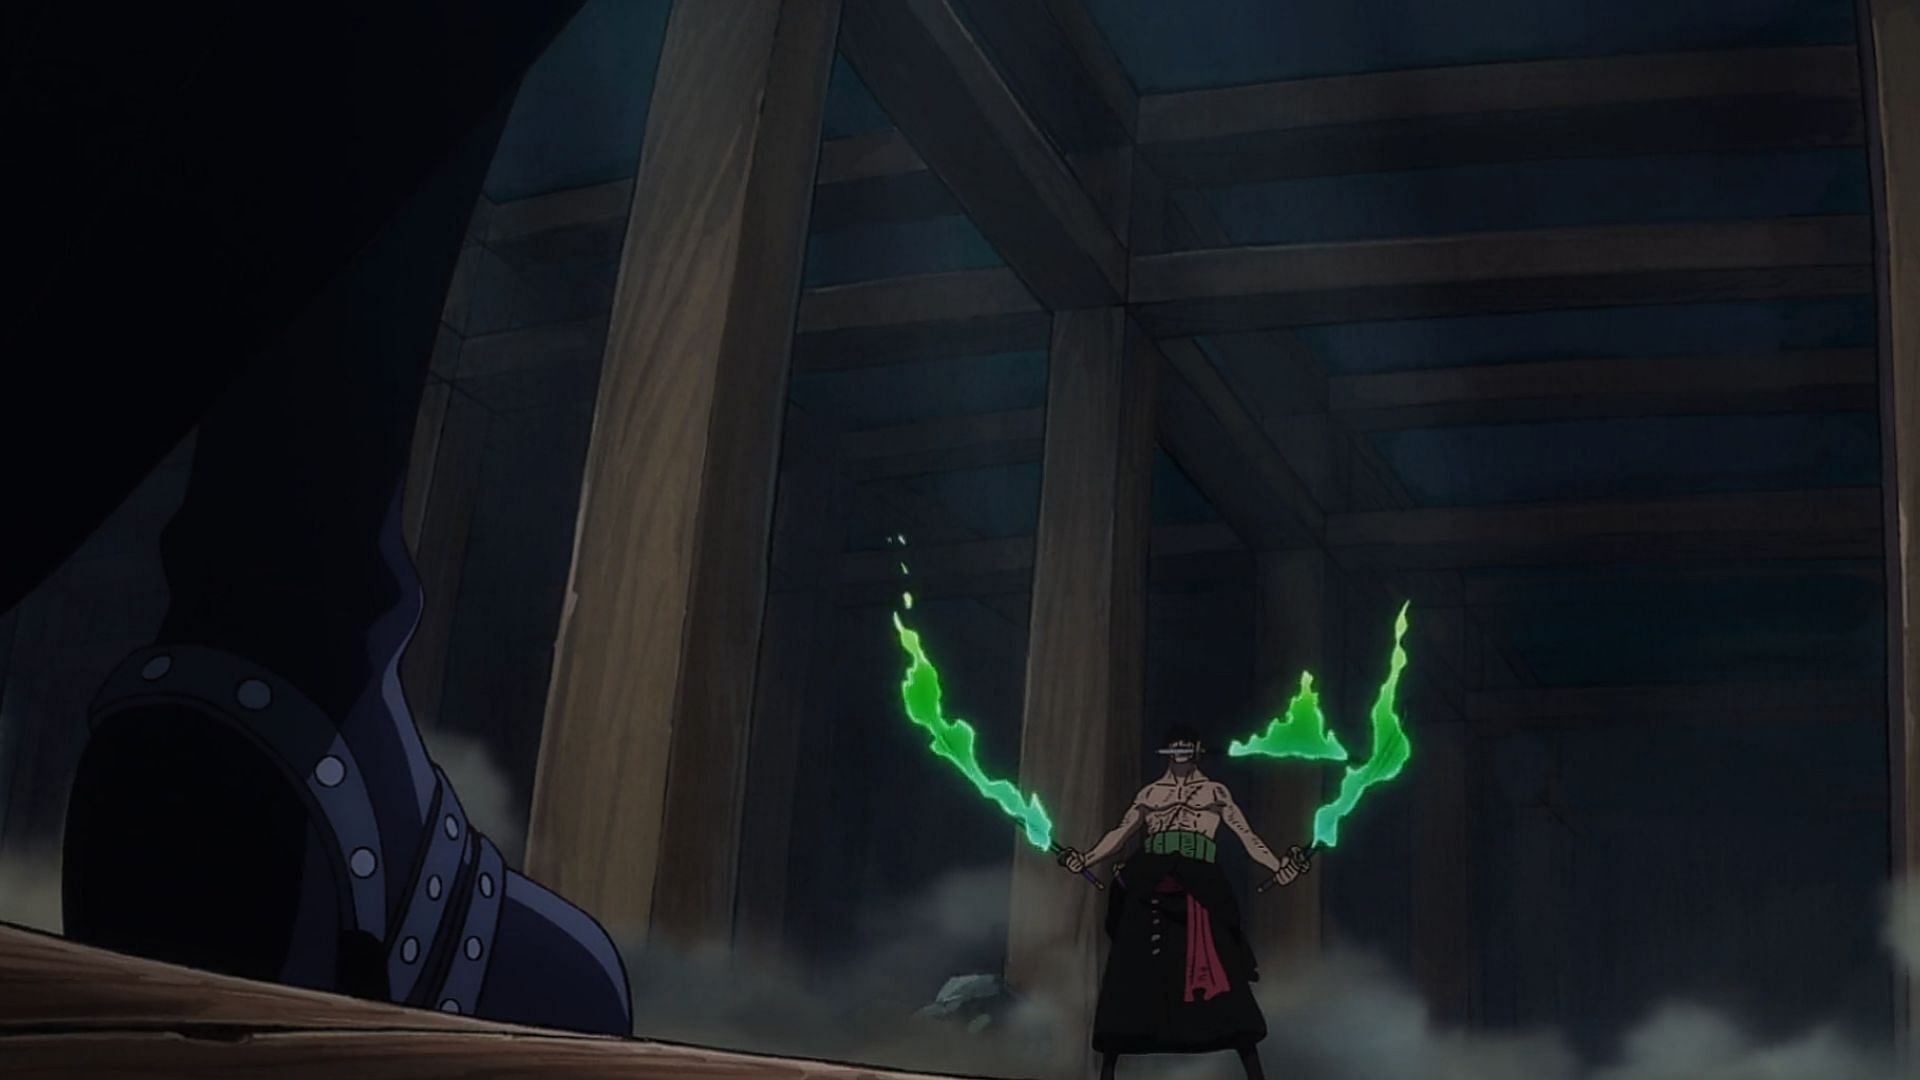 One Piece Episode 1060 - The Secret of Enma! The Cursed Sword